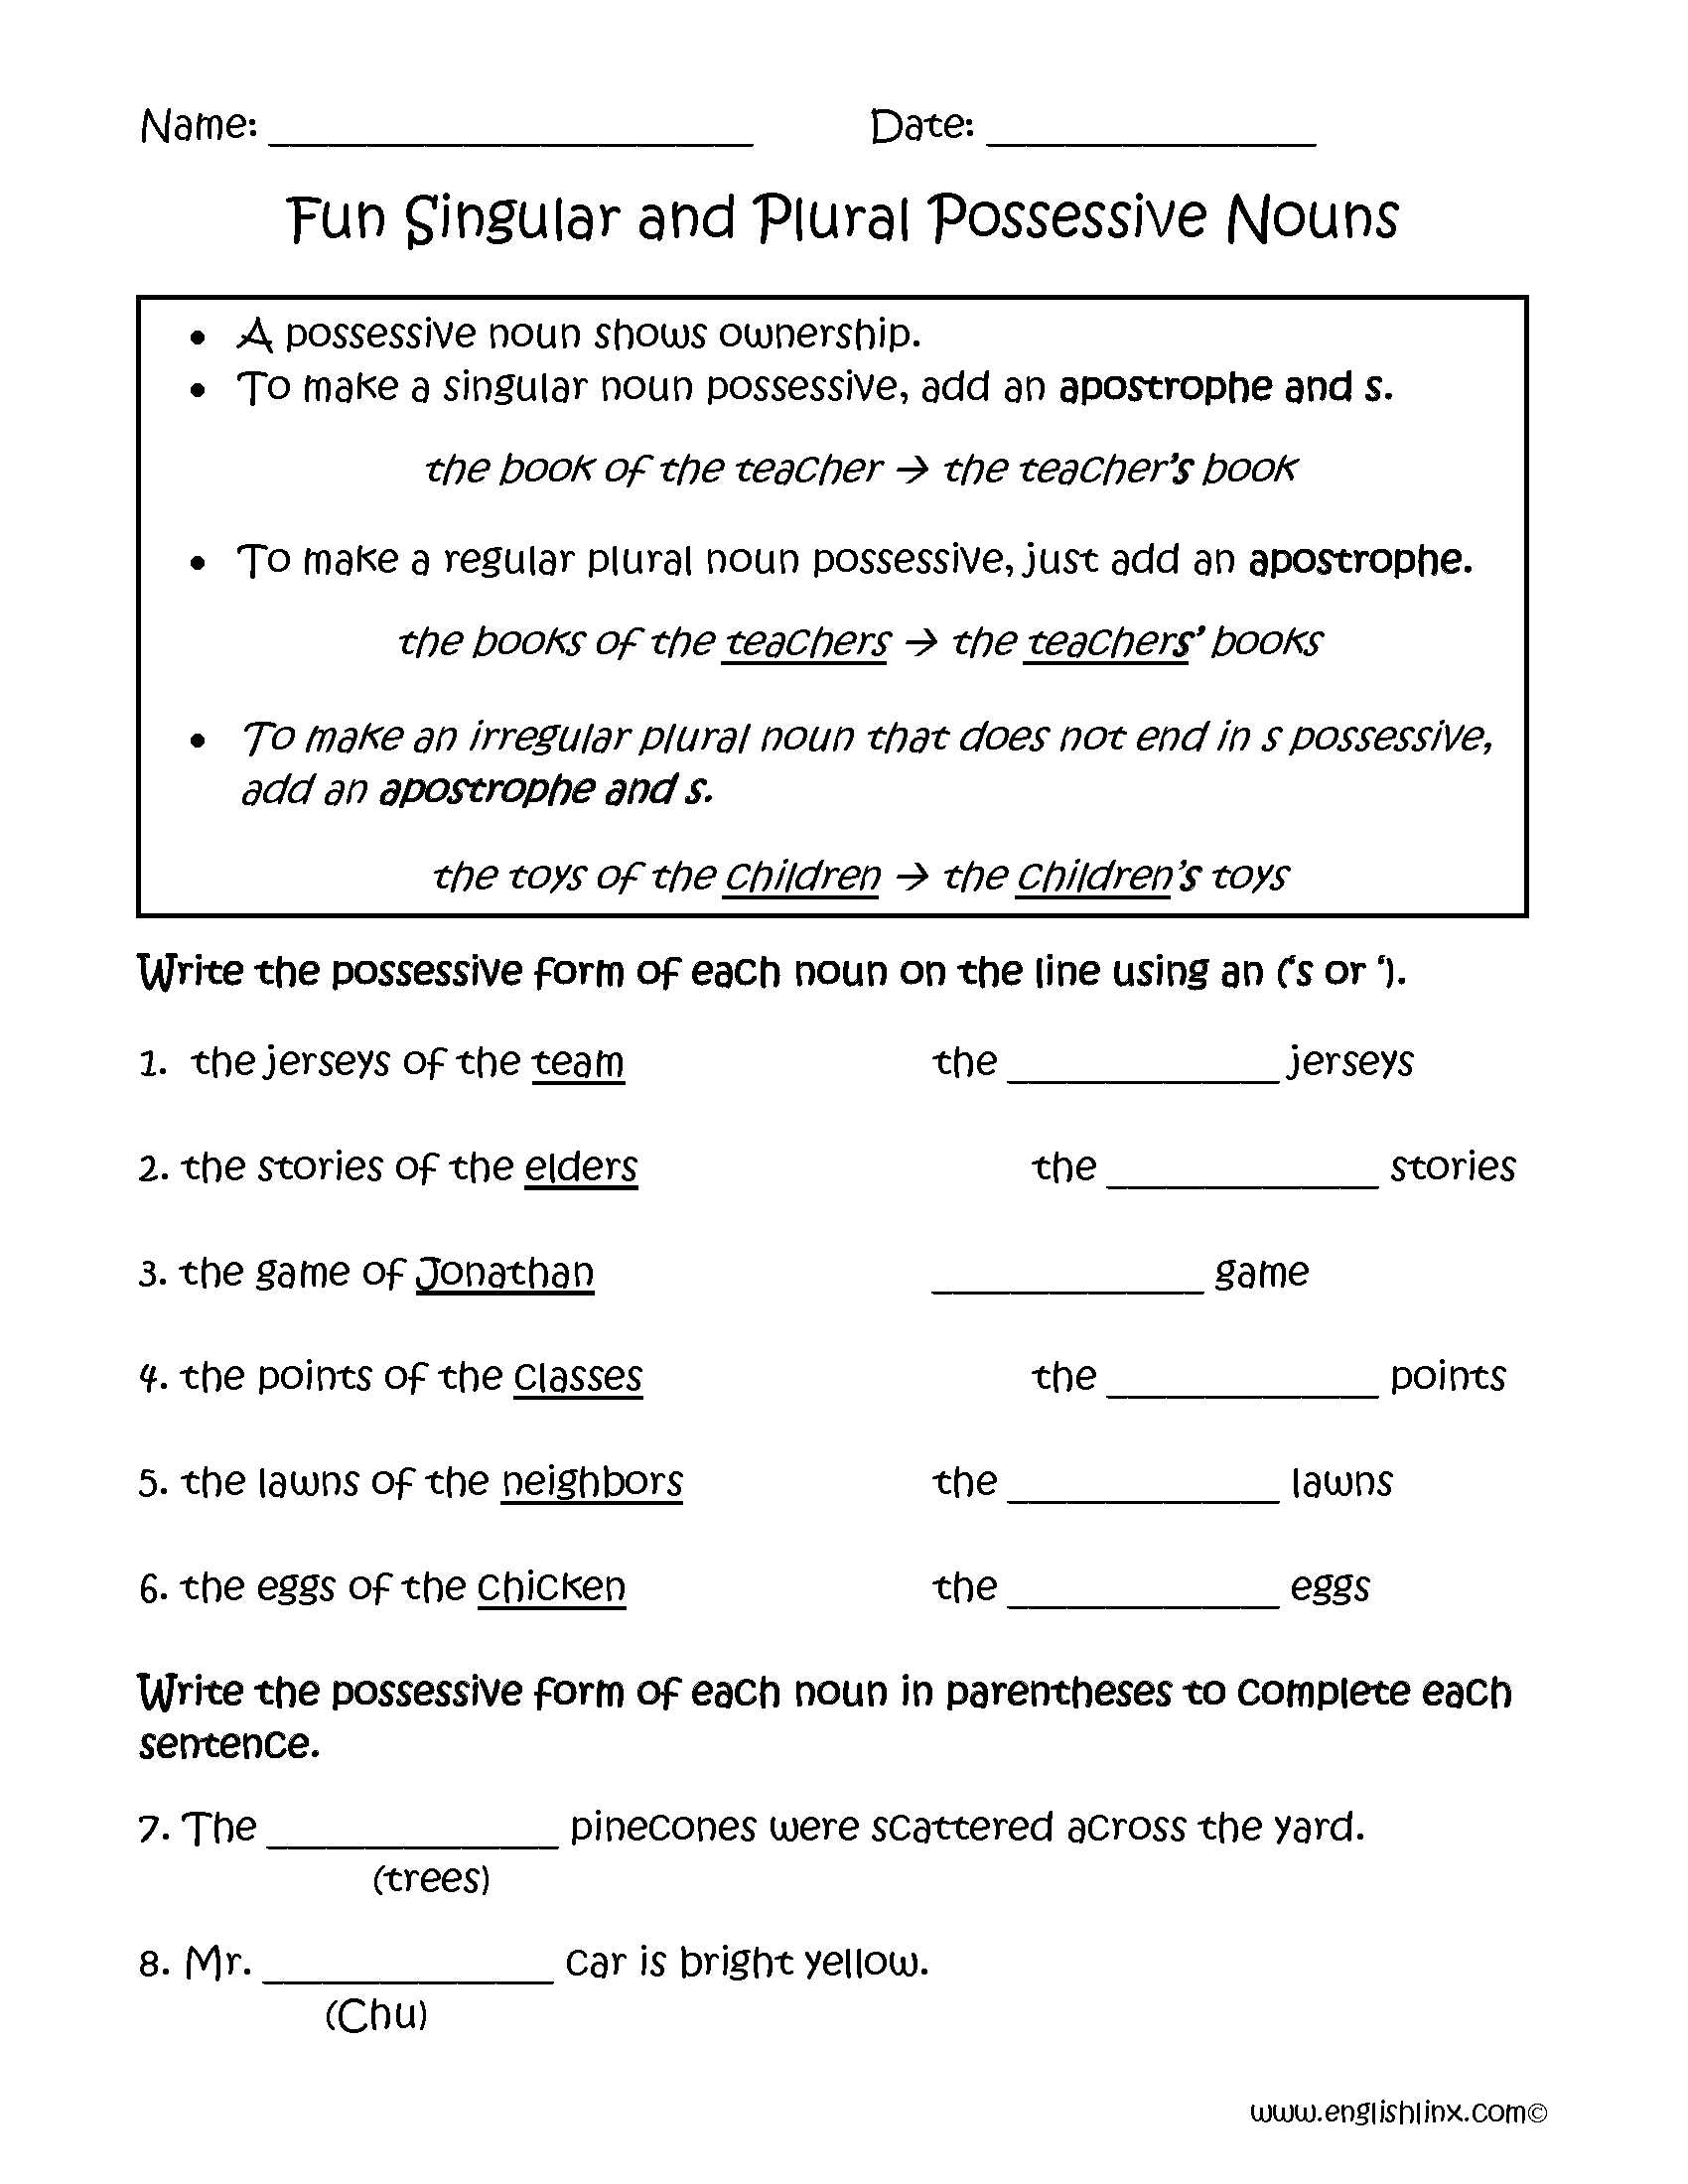 The Gender Of Nouns Spanish Worksheet Answers as Well as Fun Singular and Plural Possessive Nouns Worksheets